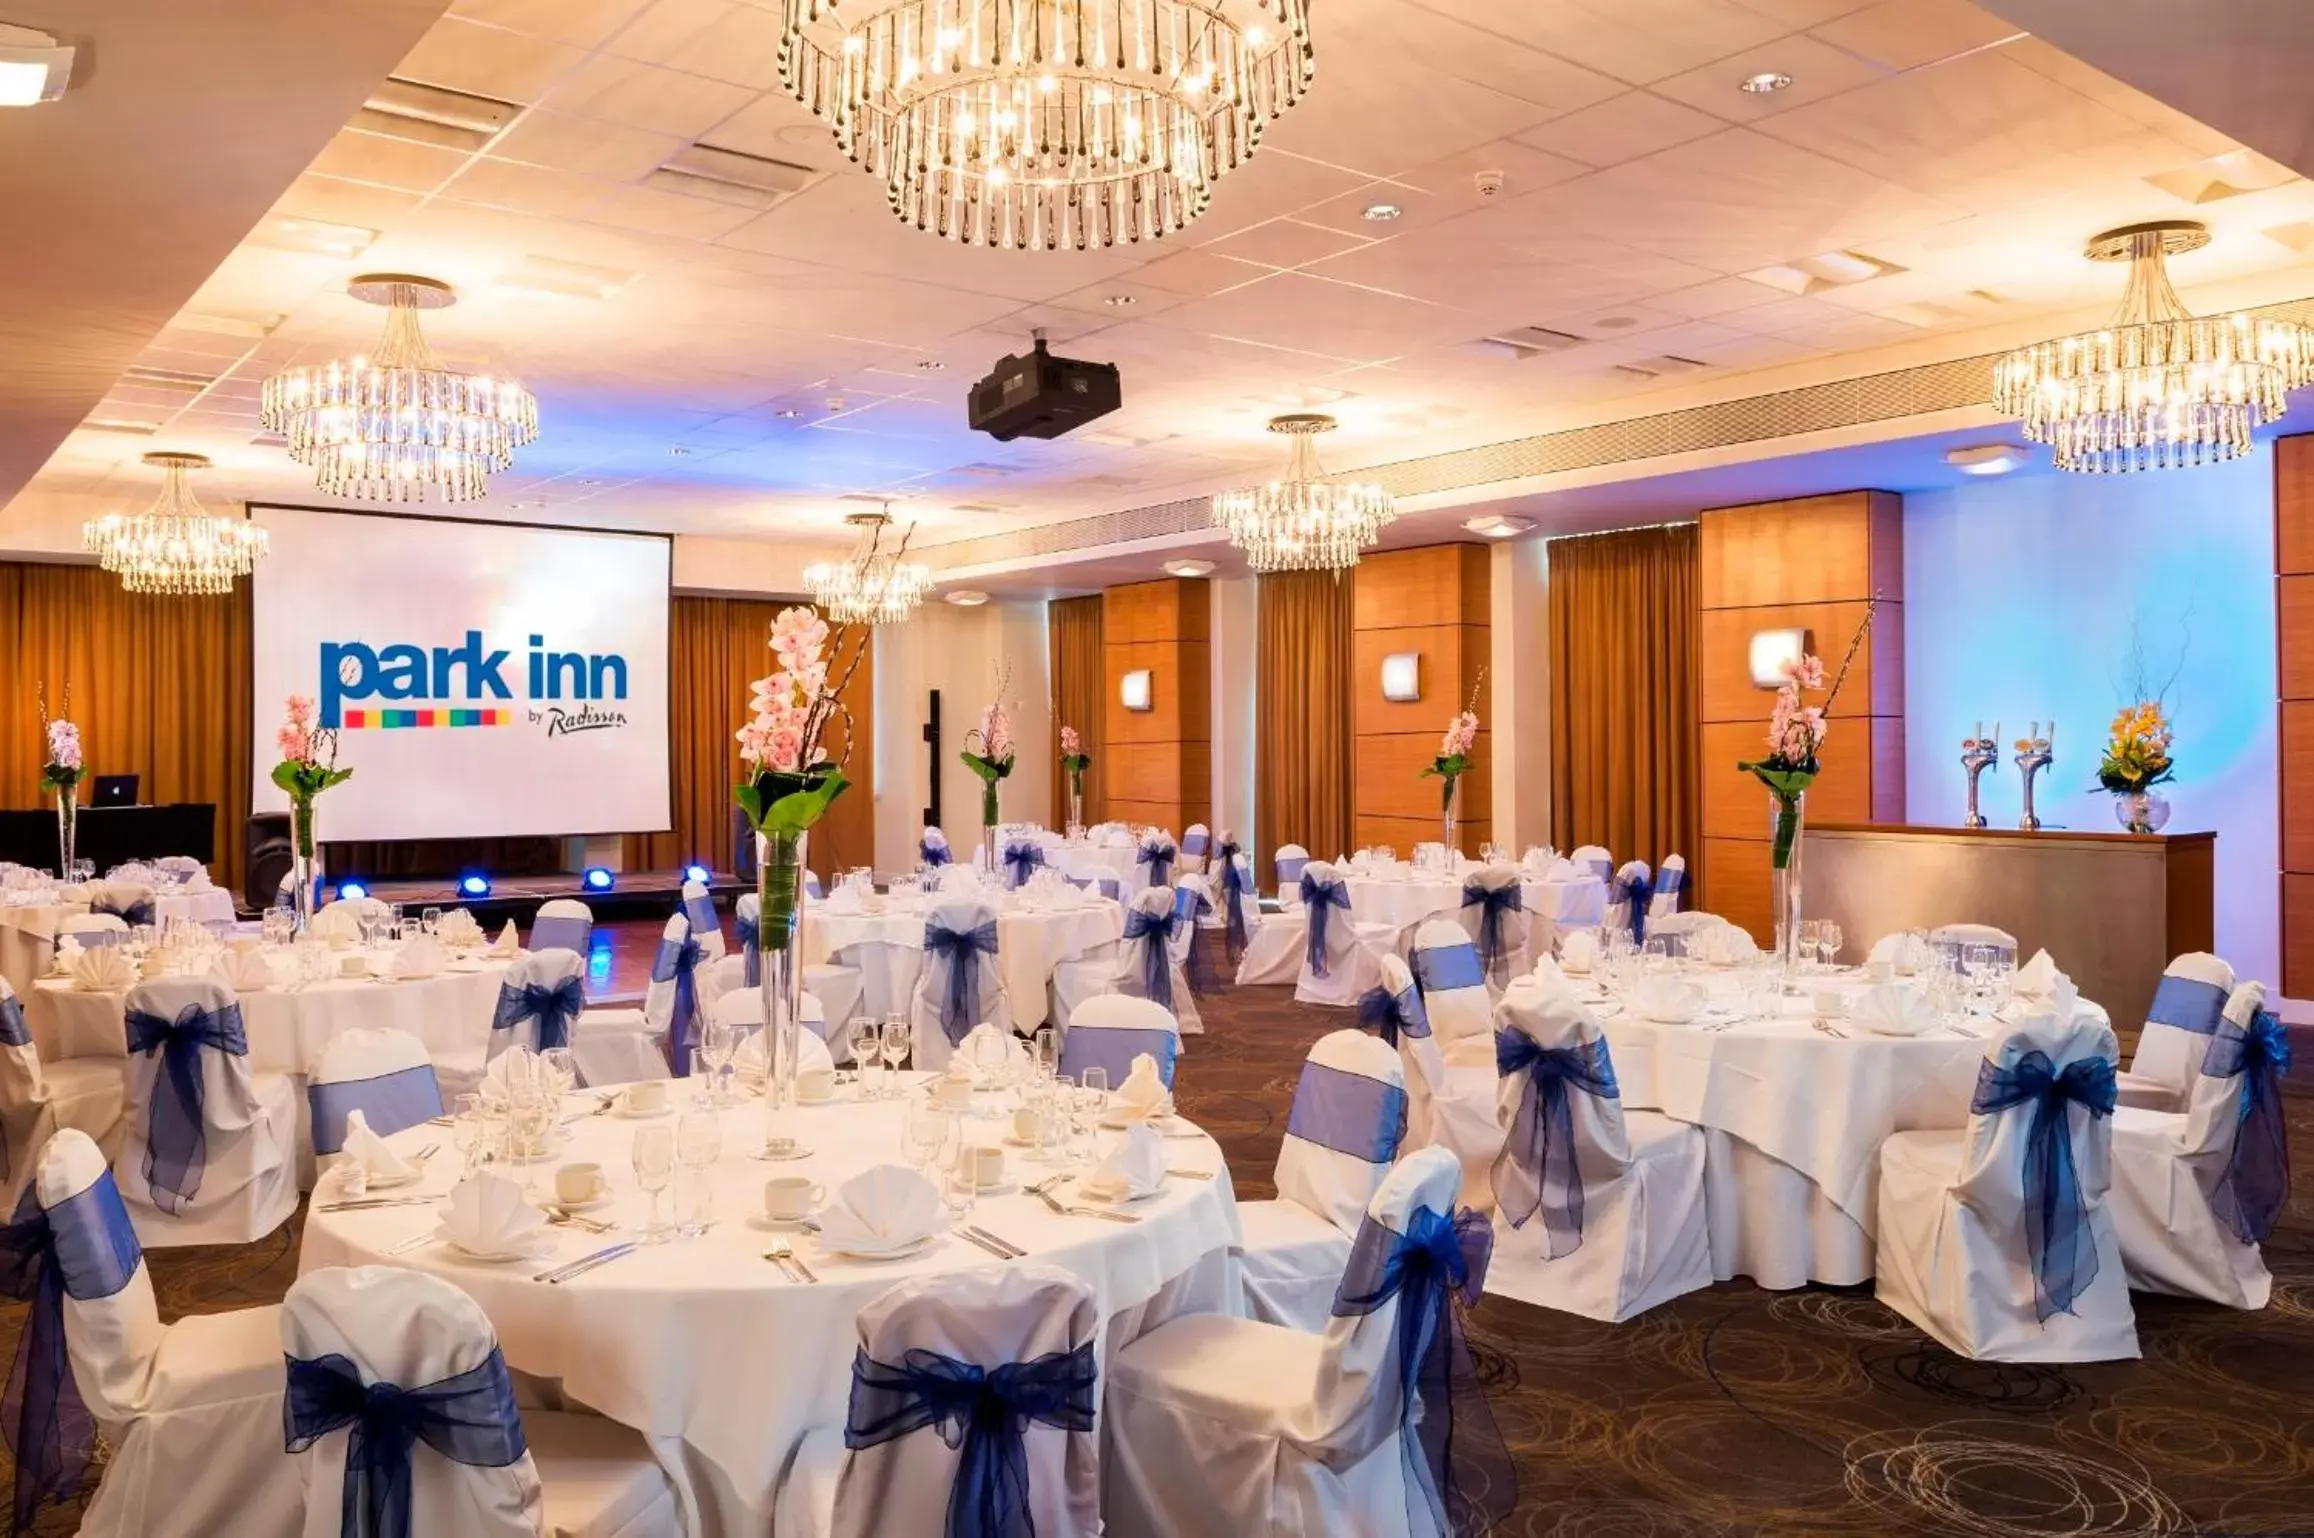 Banquet/Function facilities, Banquet Facilities in Park Inn by Radisson Palace